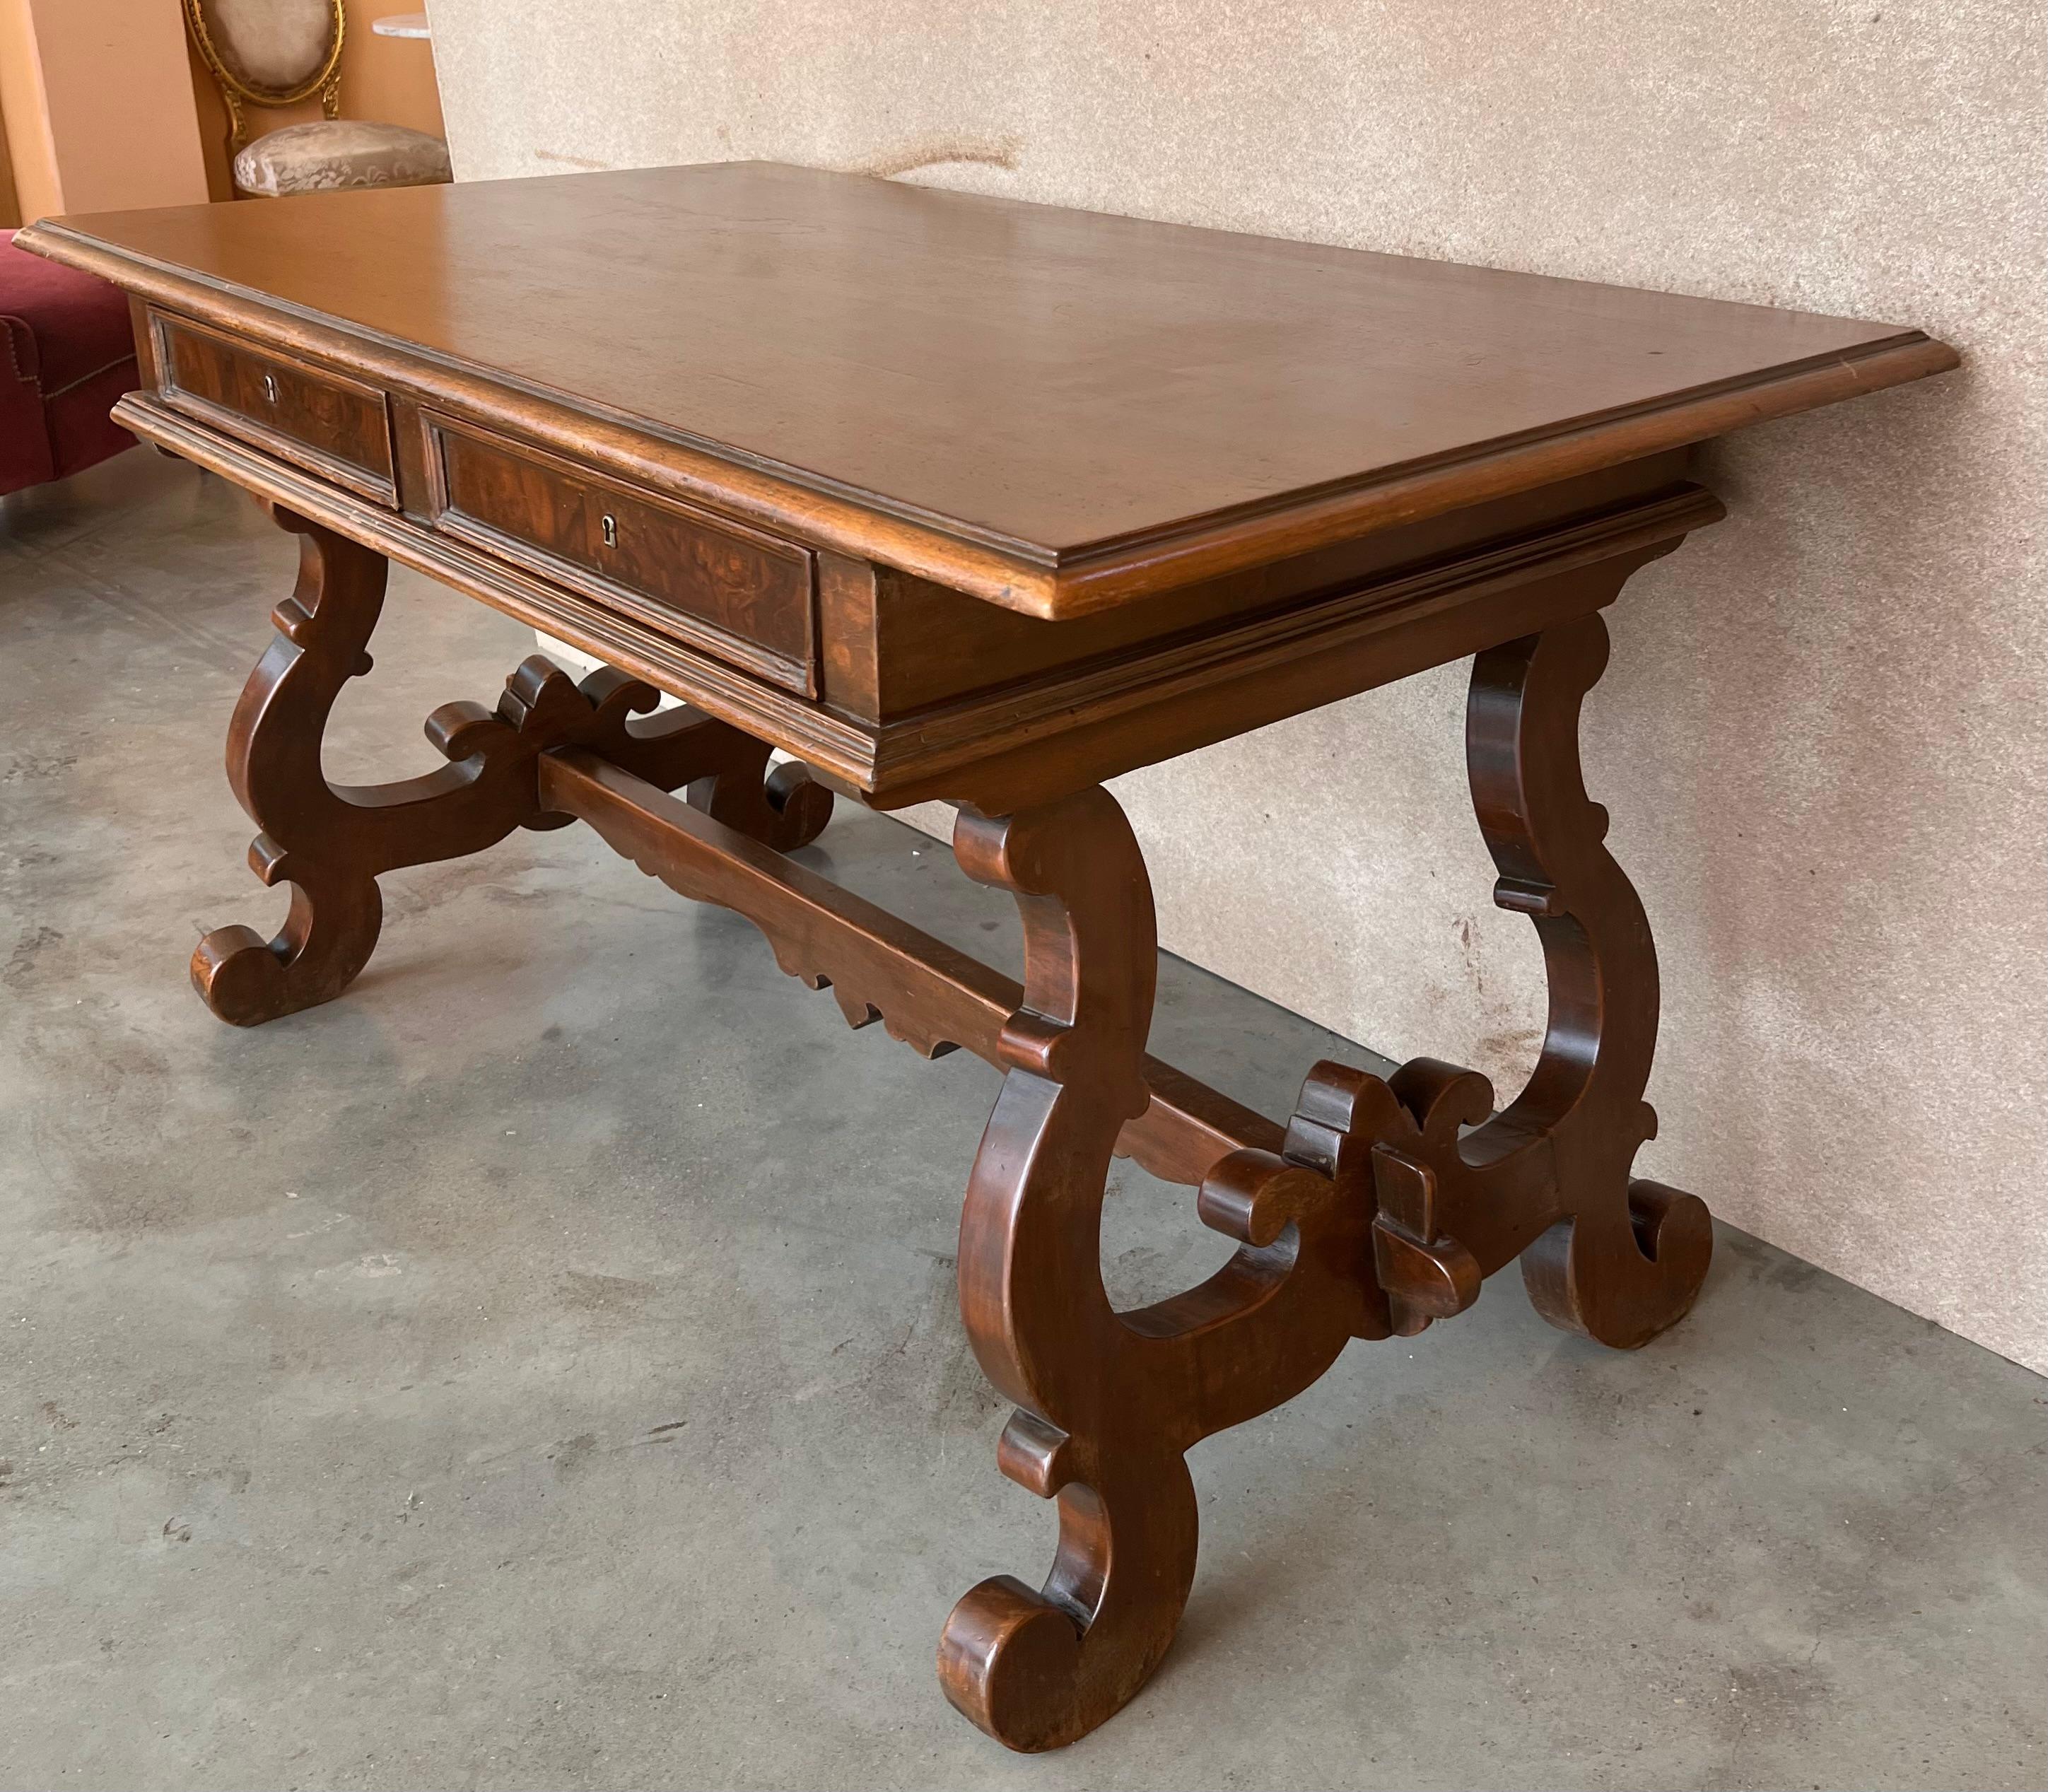 20th Century Spanish Carved Walnut House Desk with Lyre Legs In Good Condition For Sale In Miami, FL